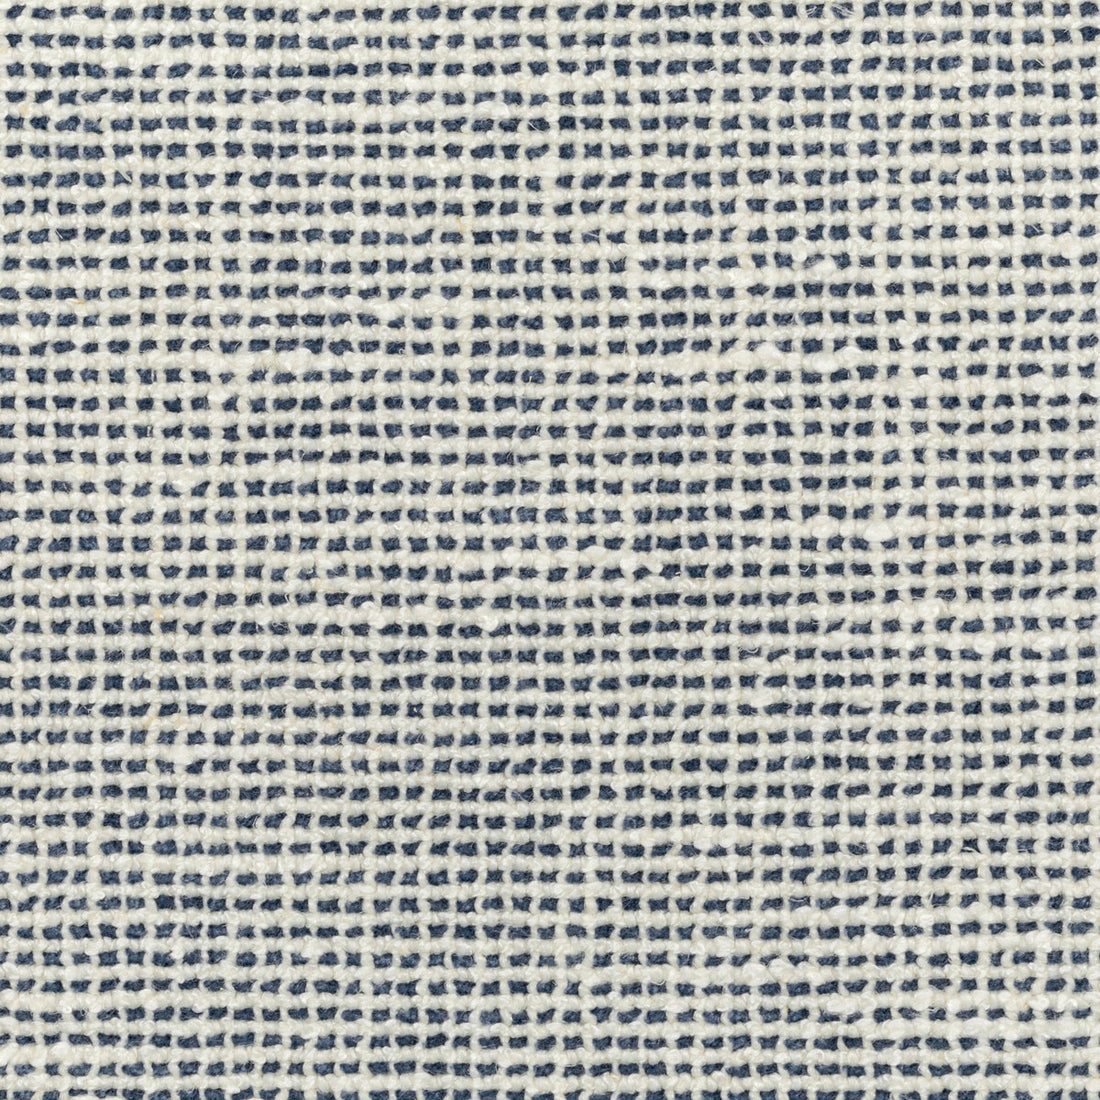 Skiffle fabric in indigo color - pattern 34449.50.0 - by Kravet Couture in the Luxury Textures II collection